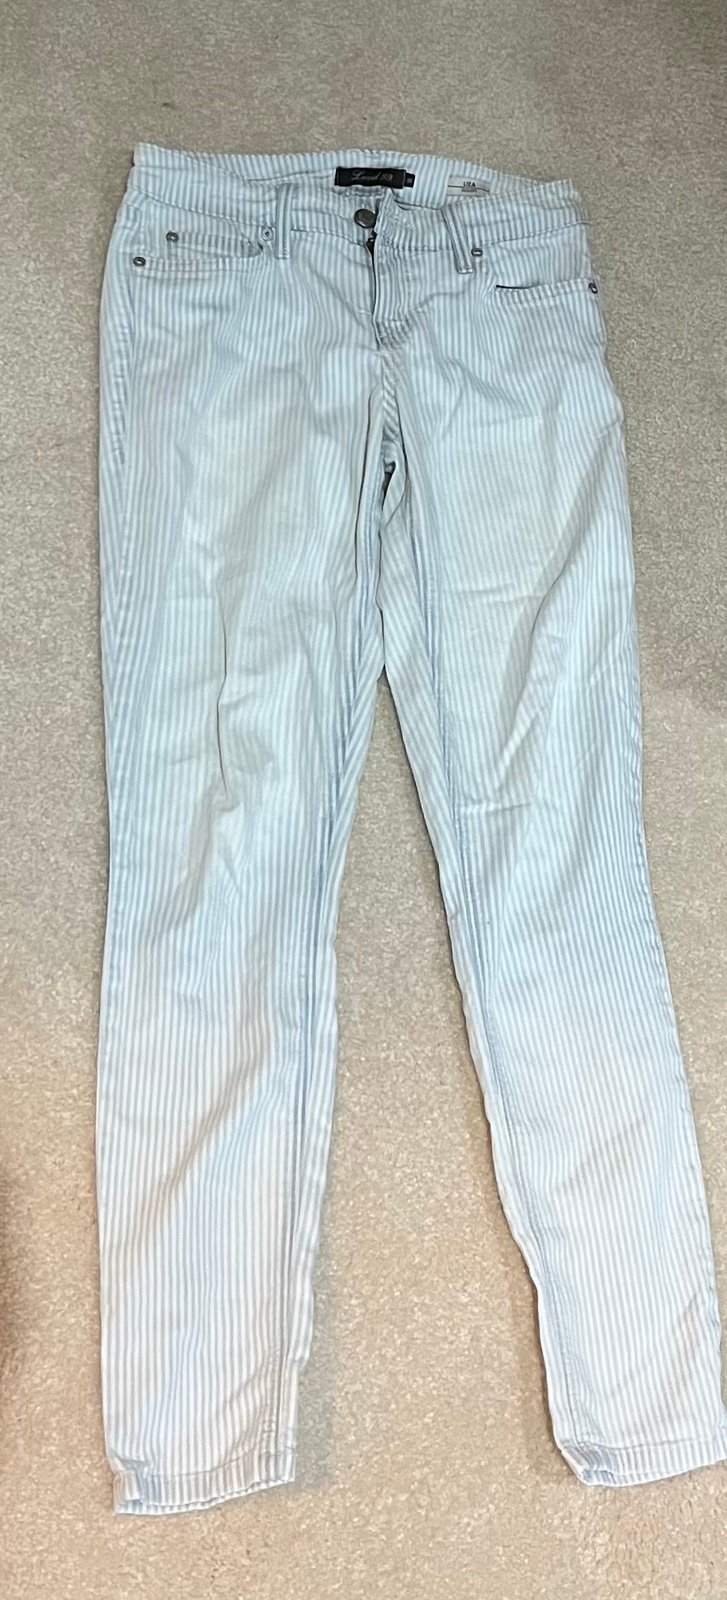 cheapest place to buy  Anthropologie pants MkHeRi16v online store